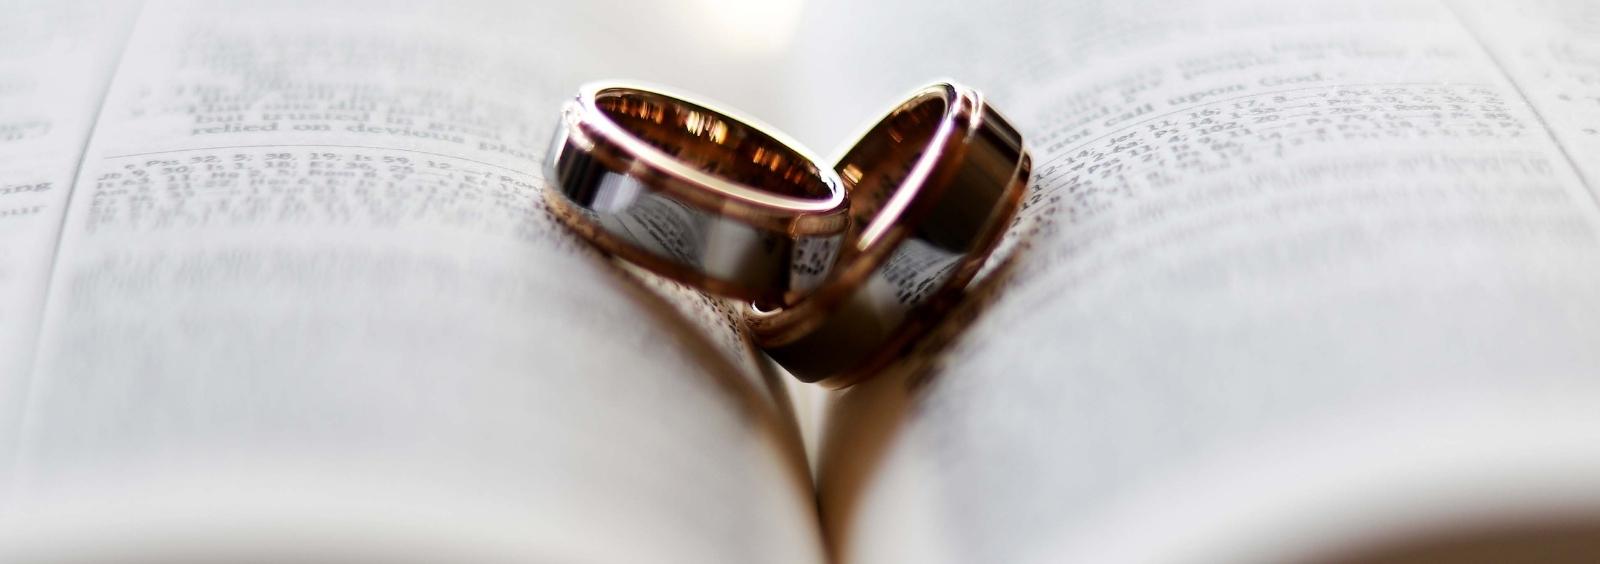 Two rings in a book.